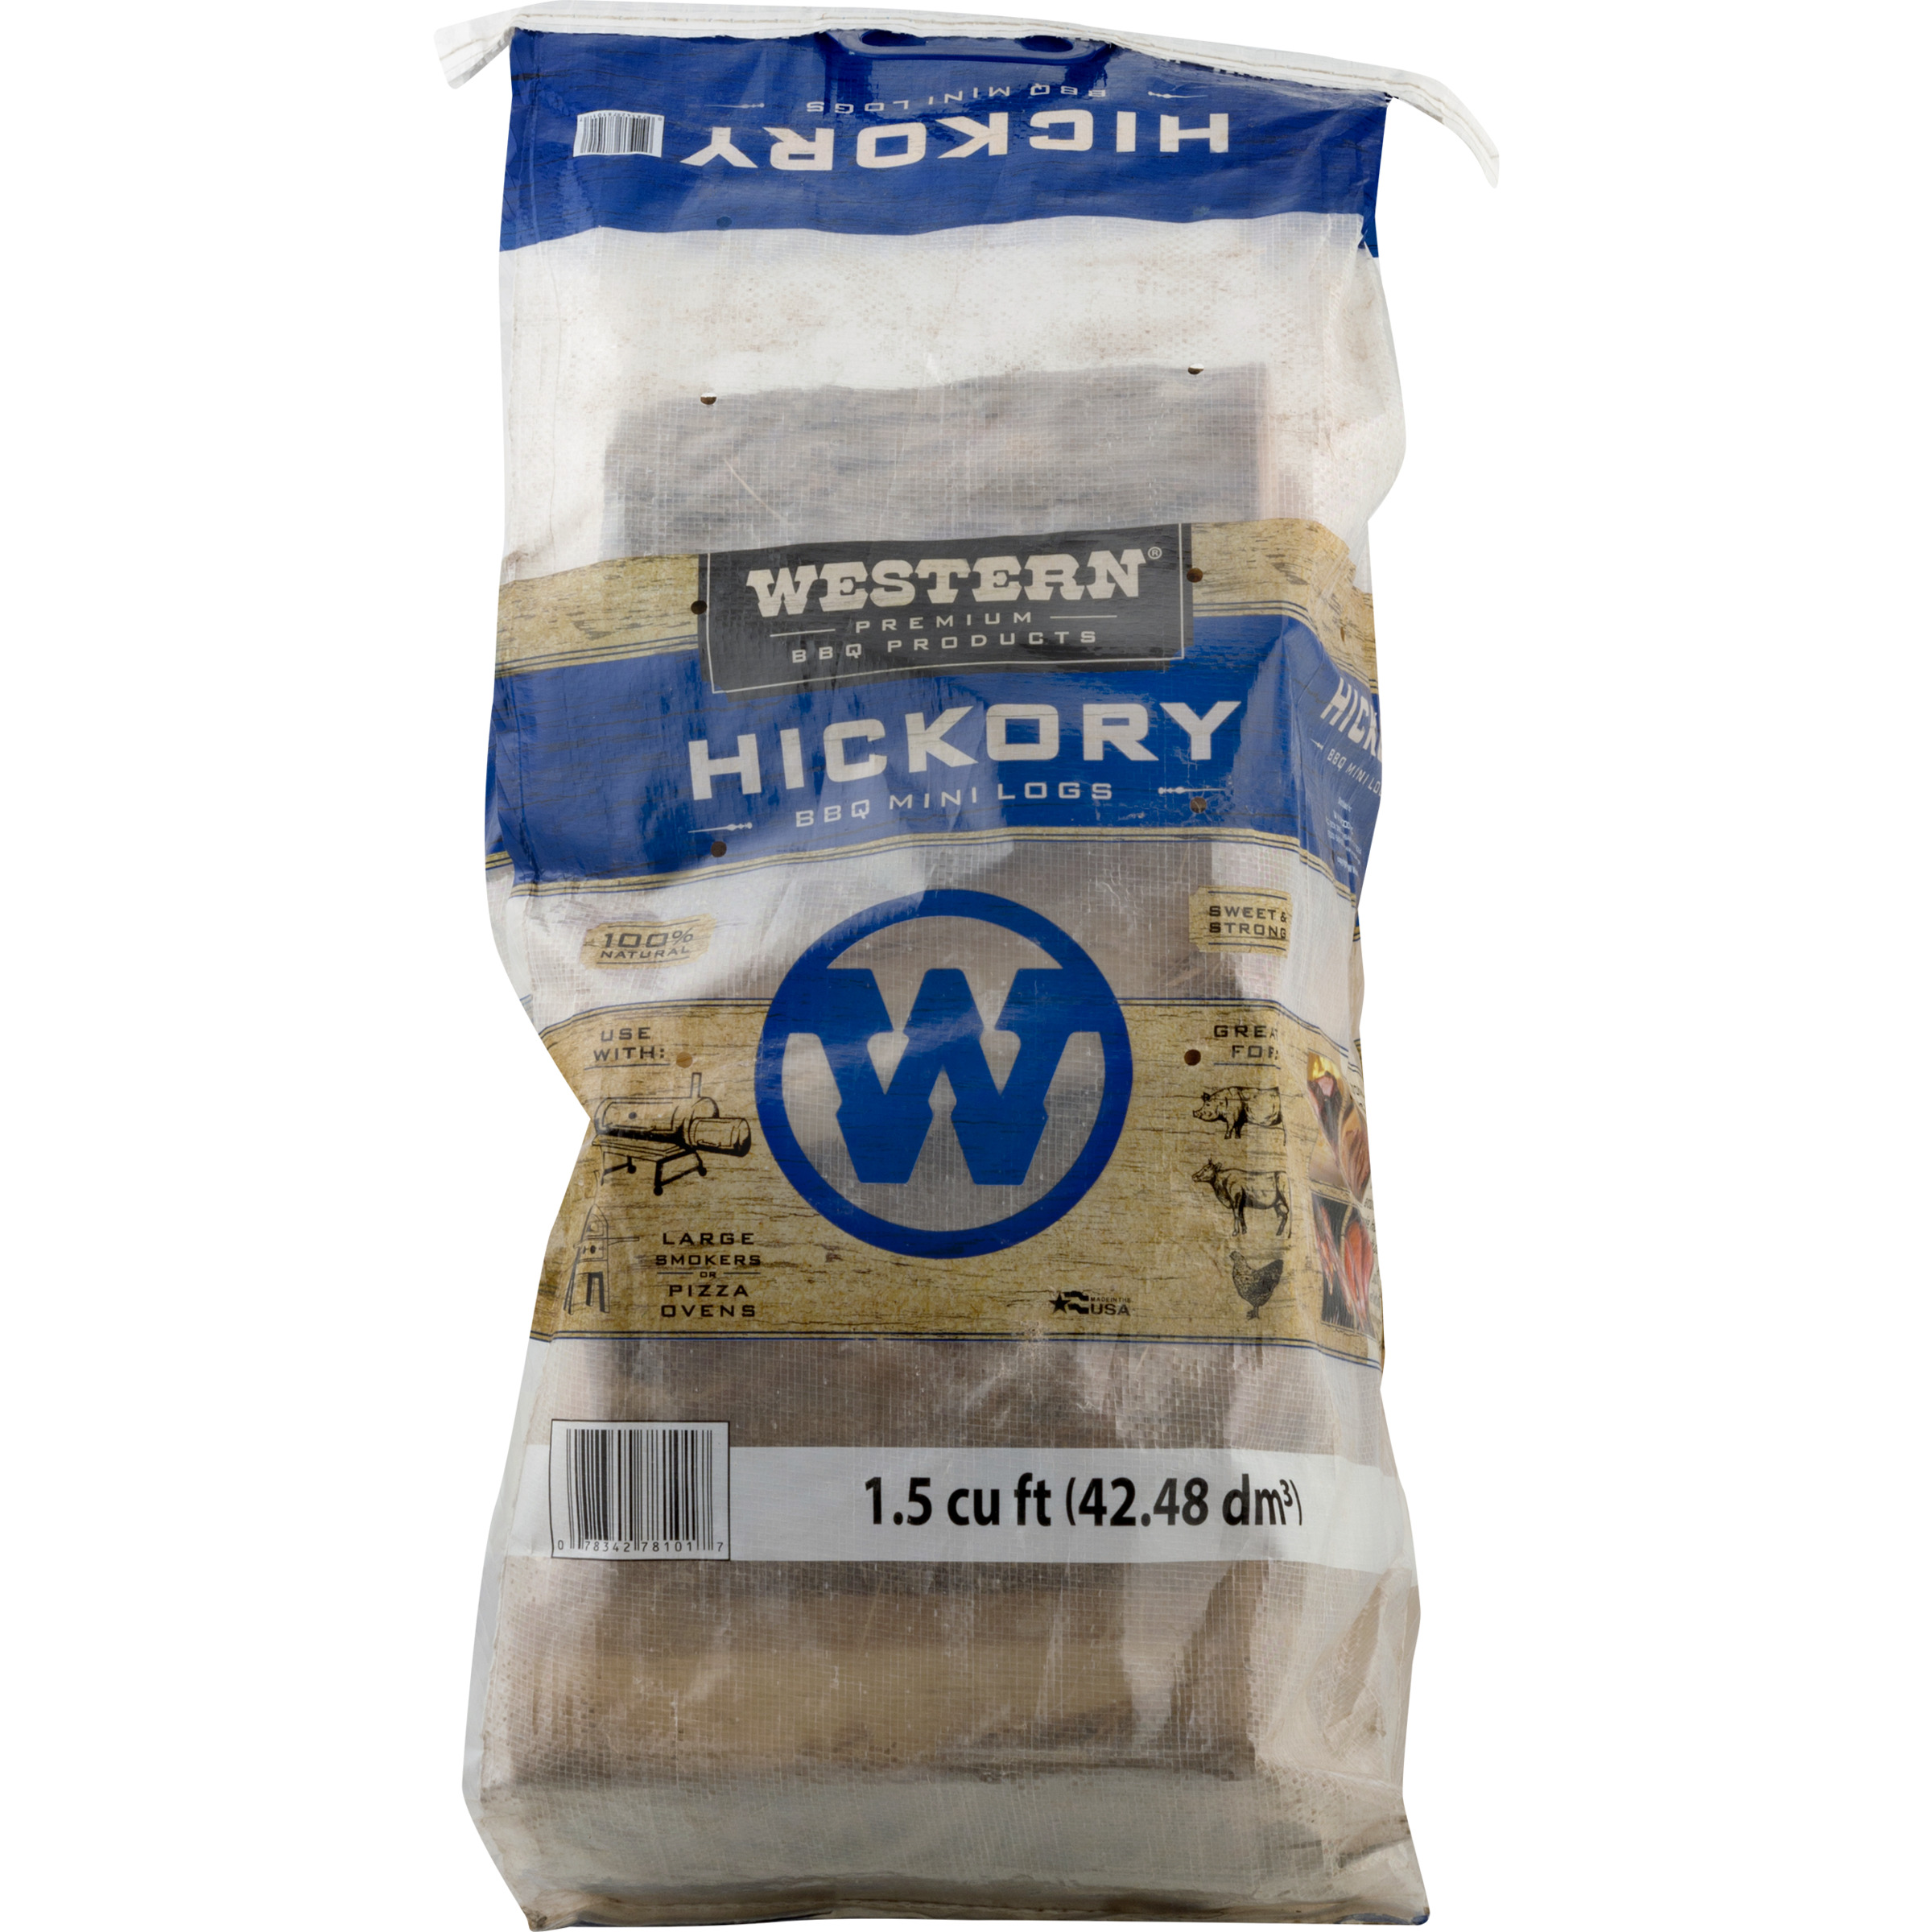 Western Premium BBQ Products 1.5 cu ft Hickory BBQ Smoking Mini Logs - image 1 of 8